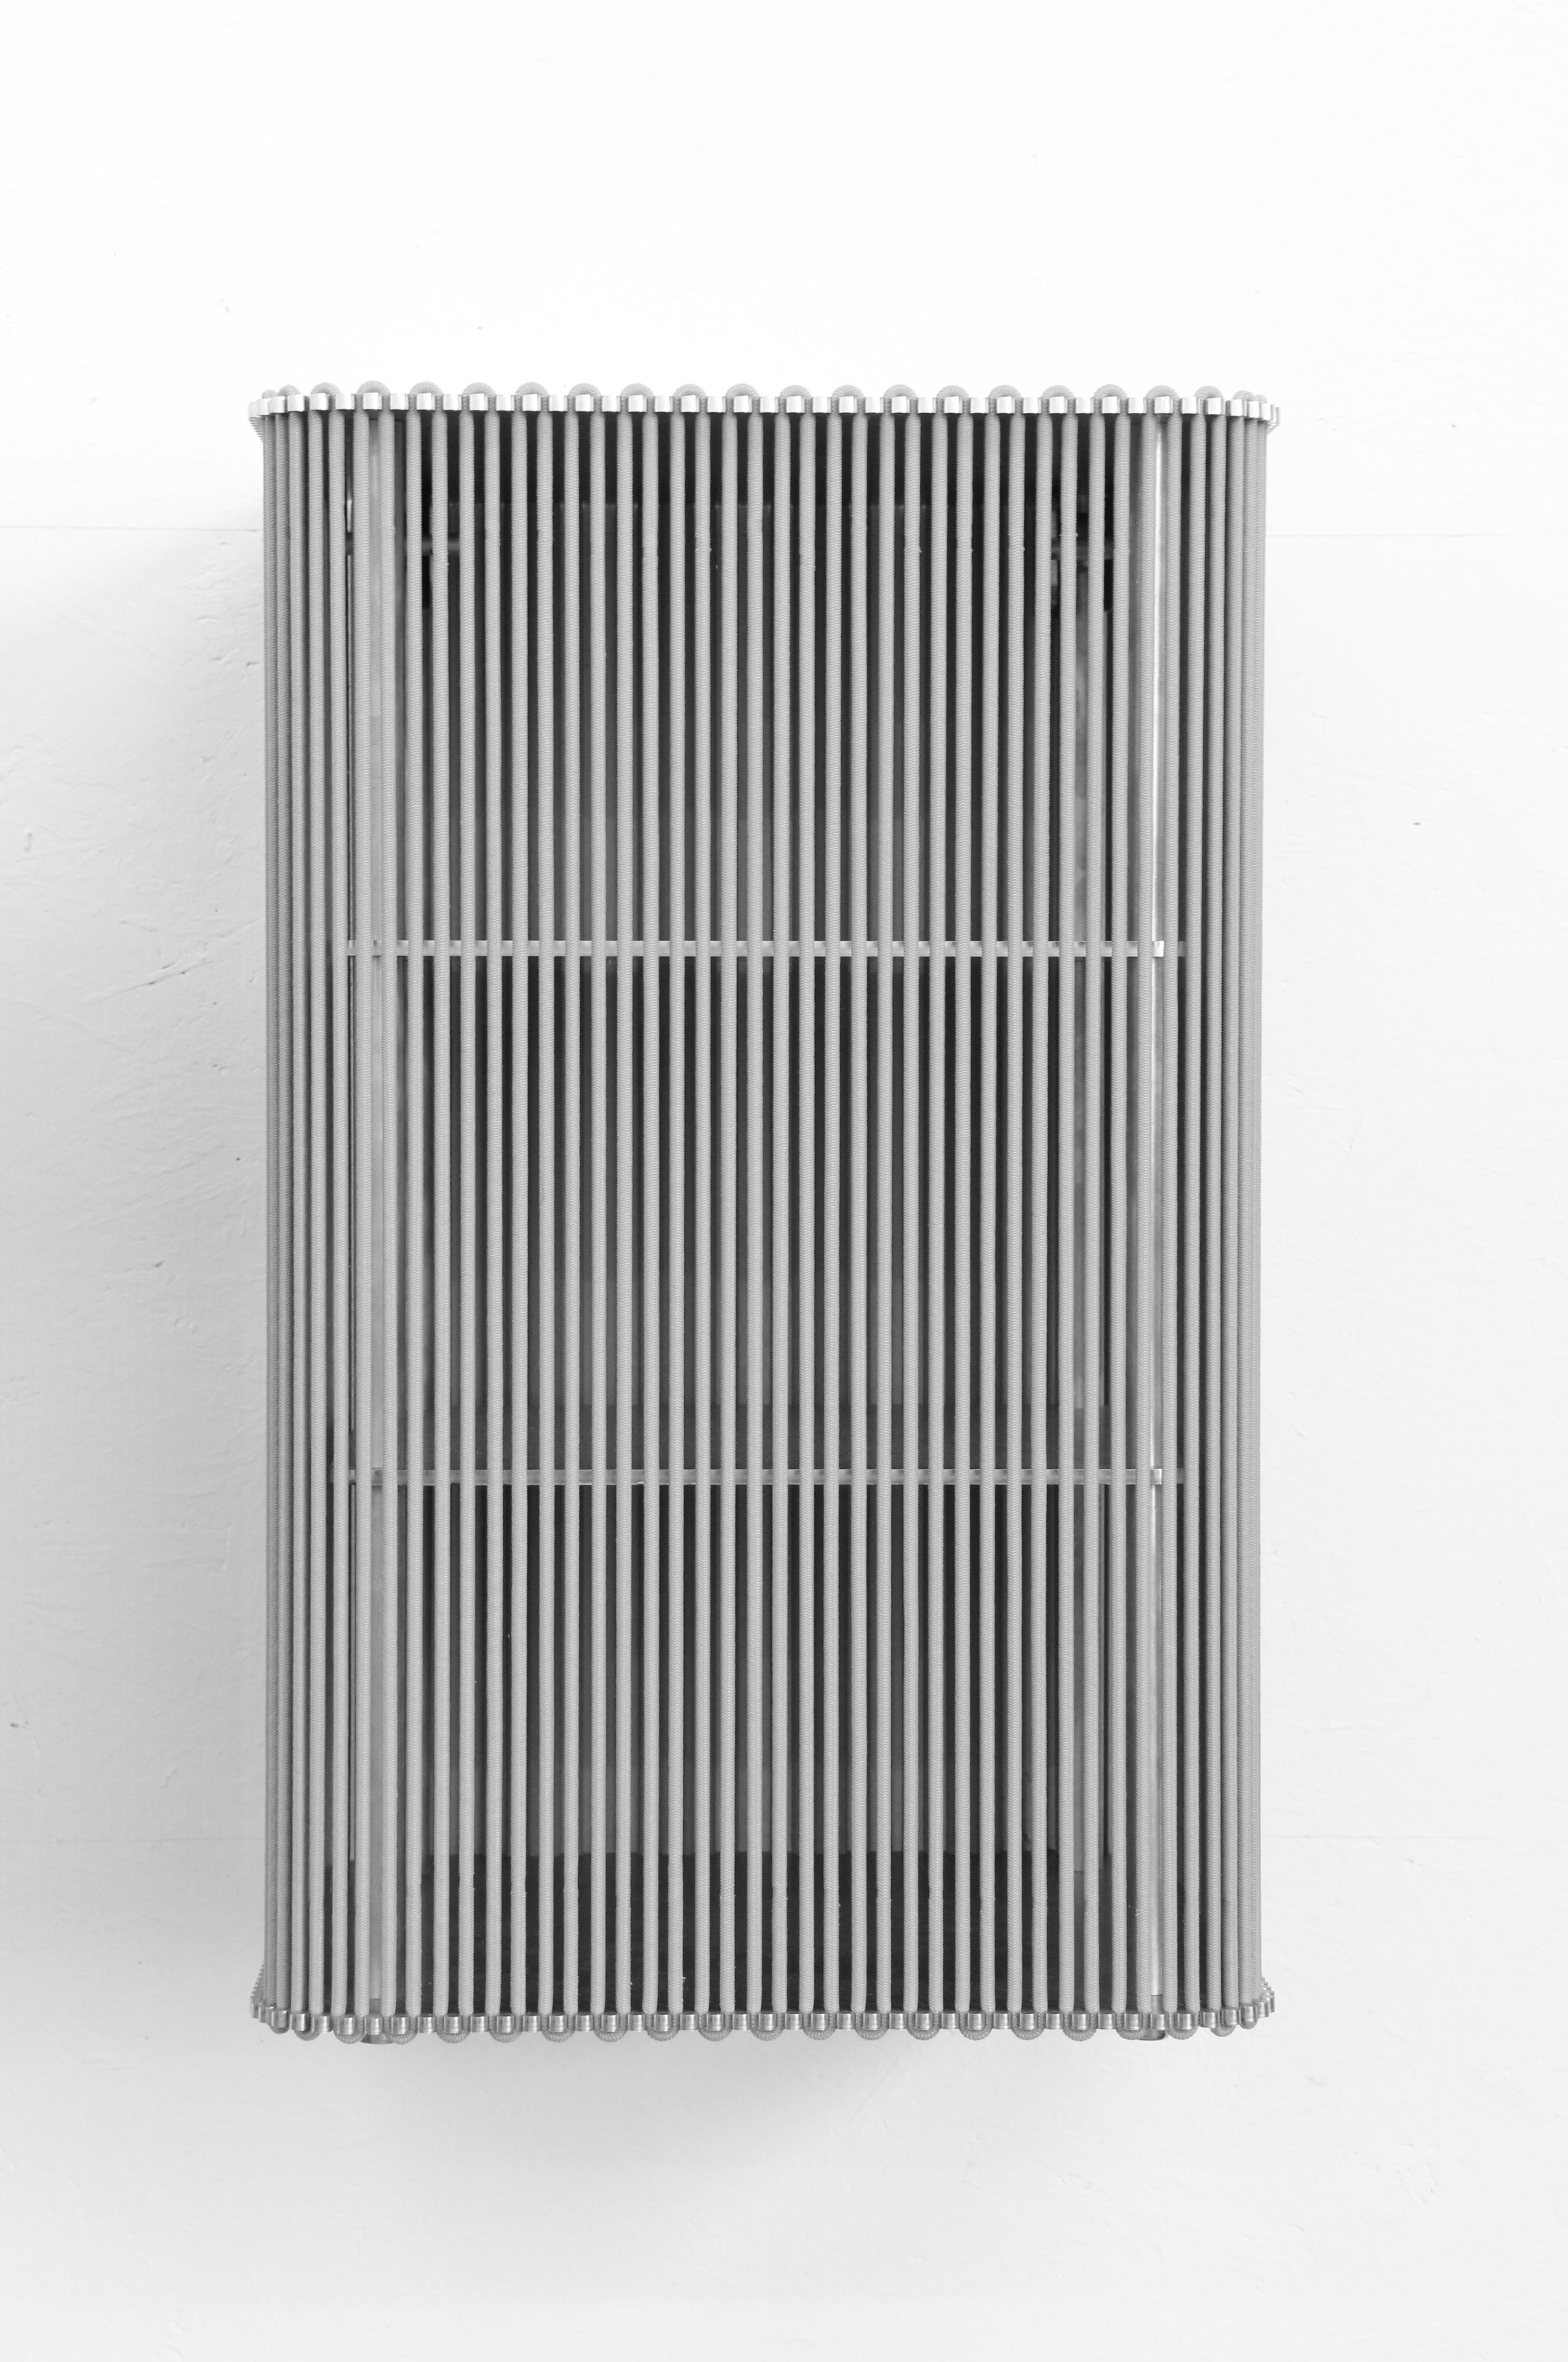 Coil #3 Cabinet Wall Mounted by Bram Kerkhofs 1